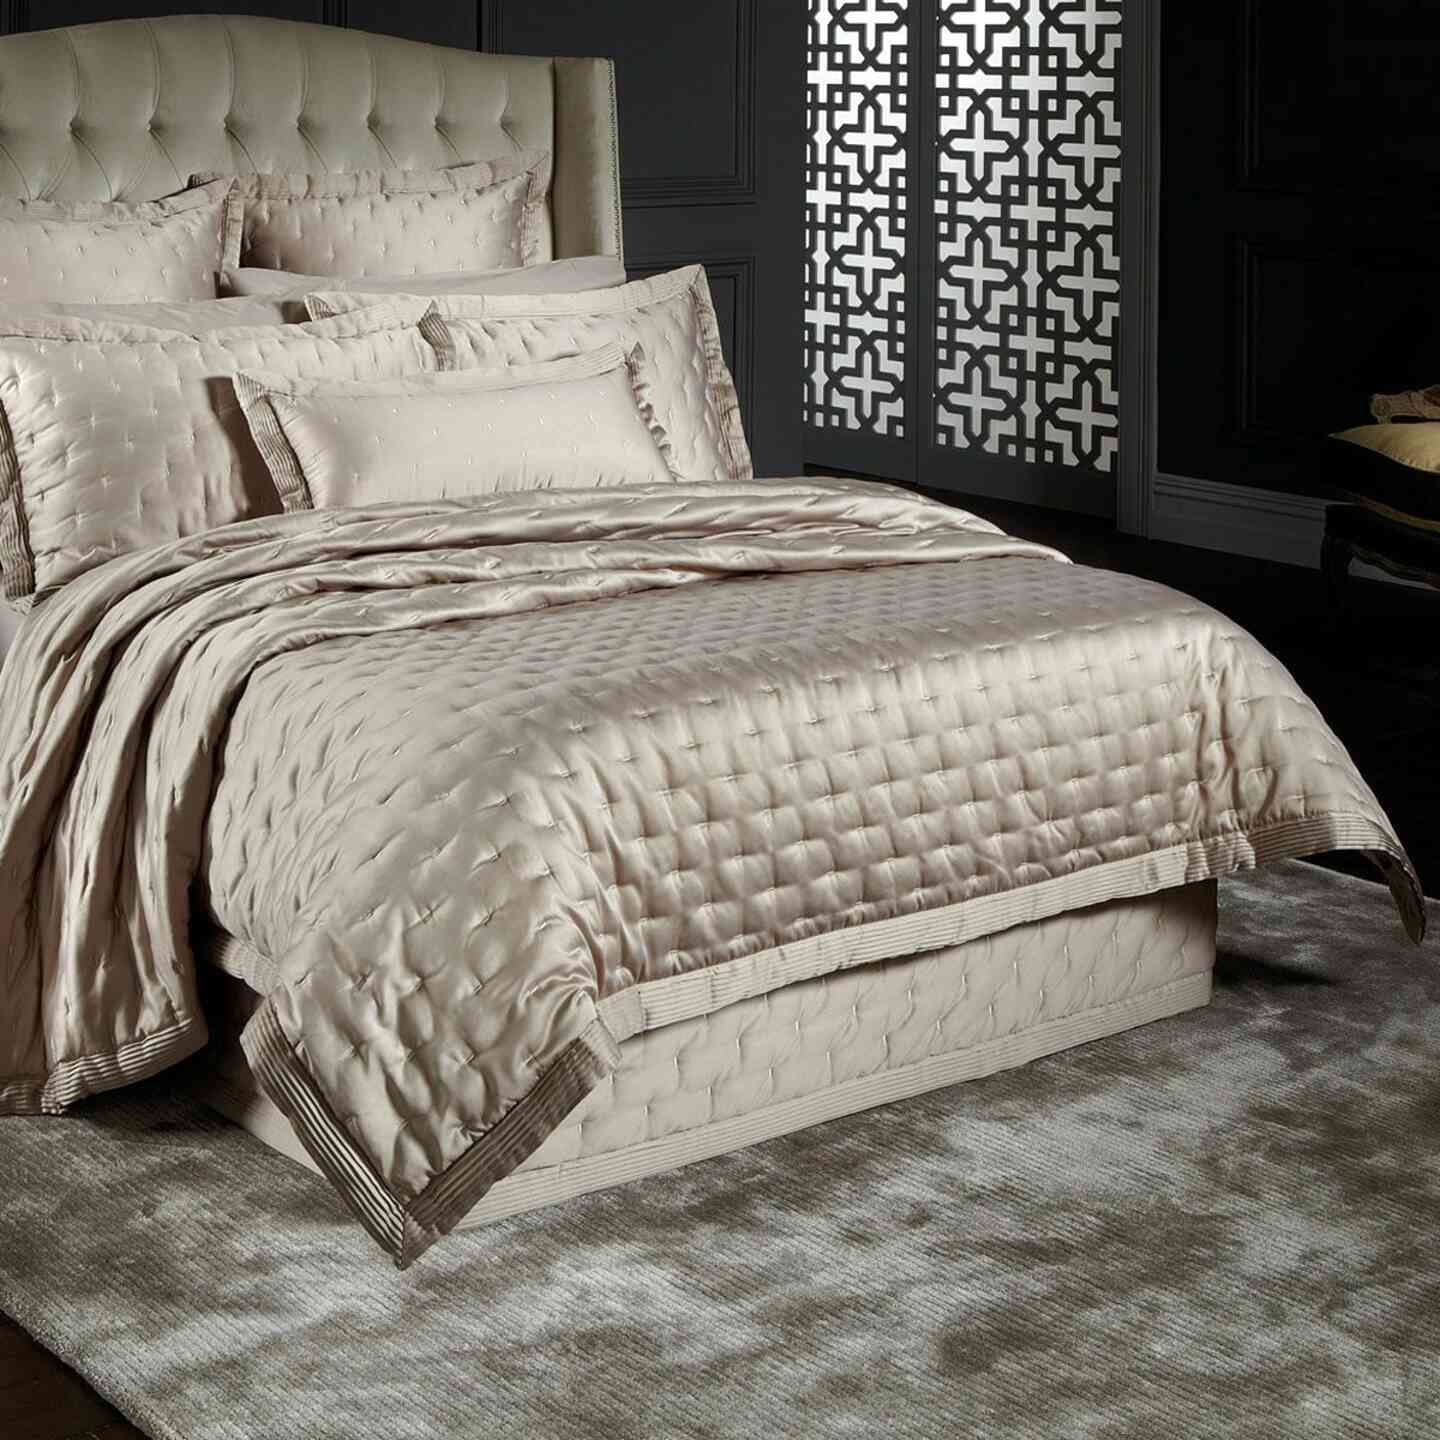 Sheridan Bedding For Sale In Uk View 20 Bargains